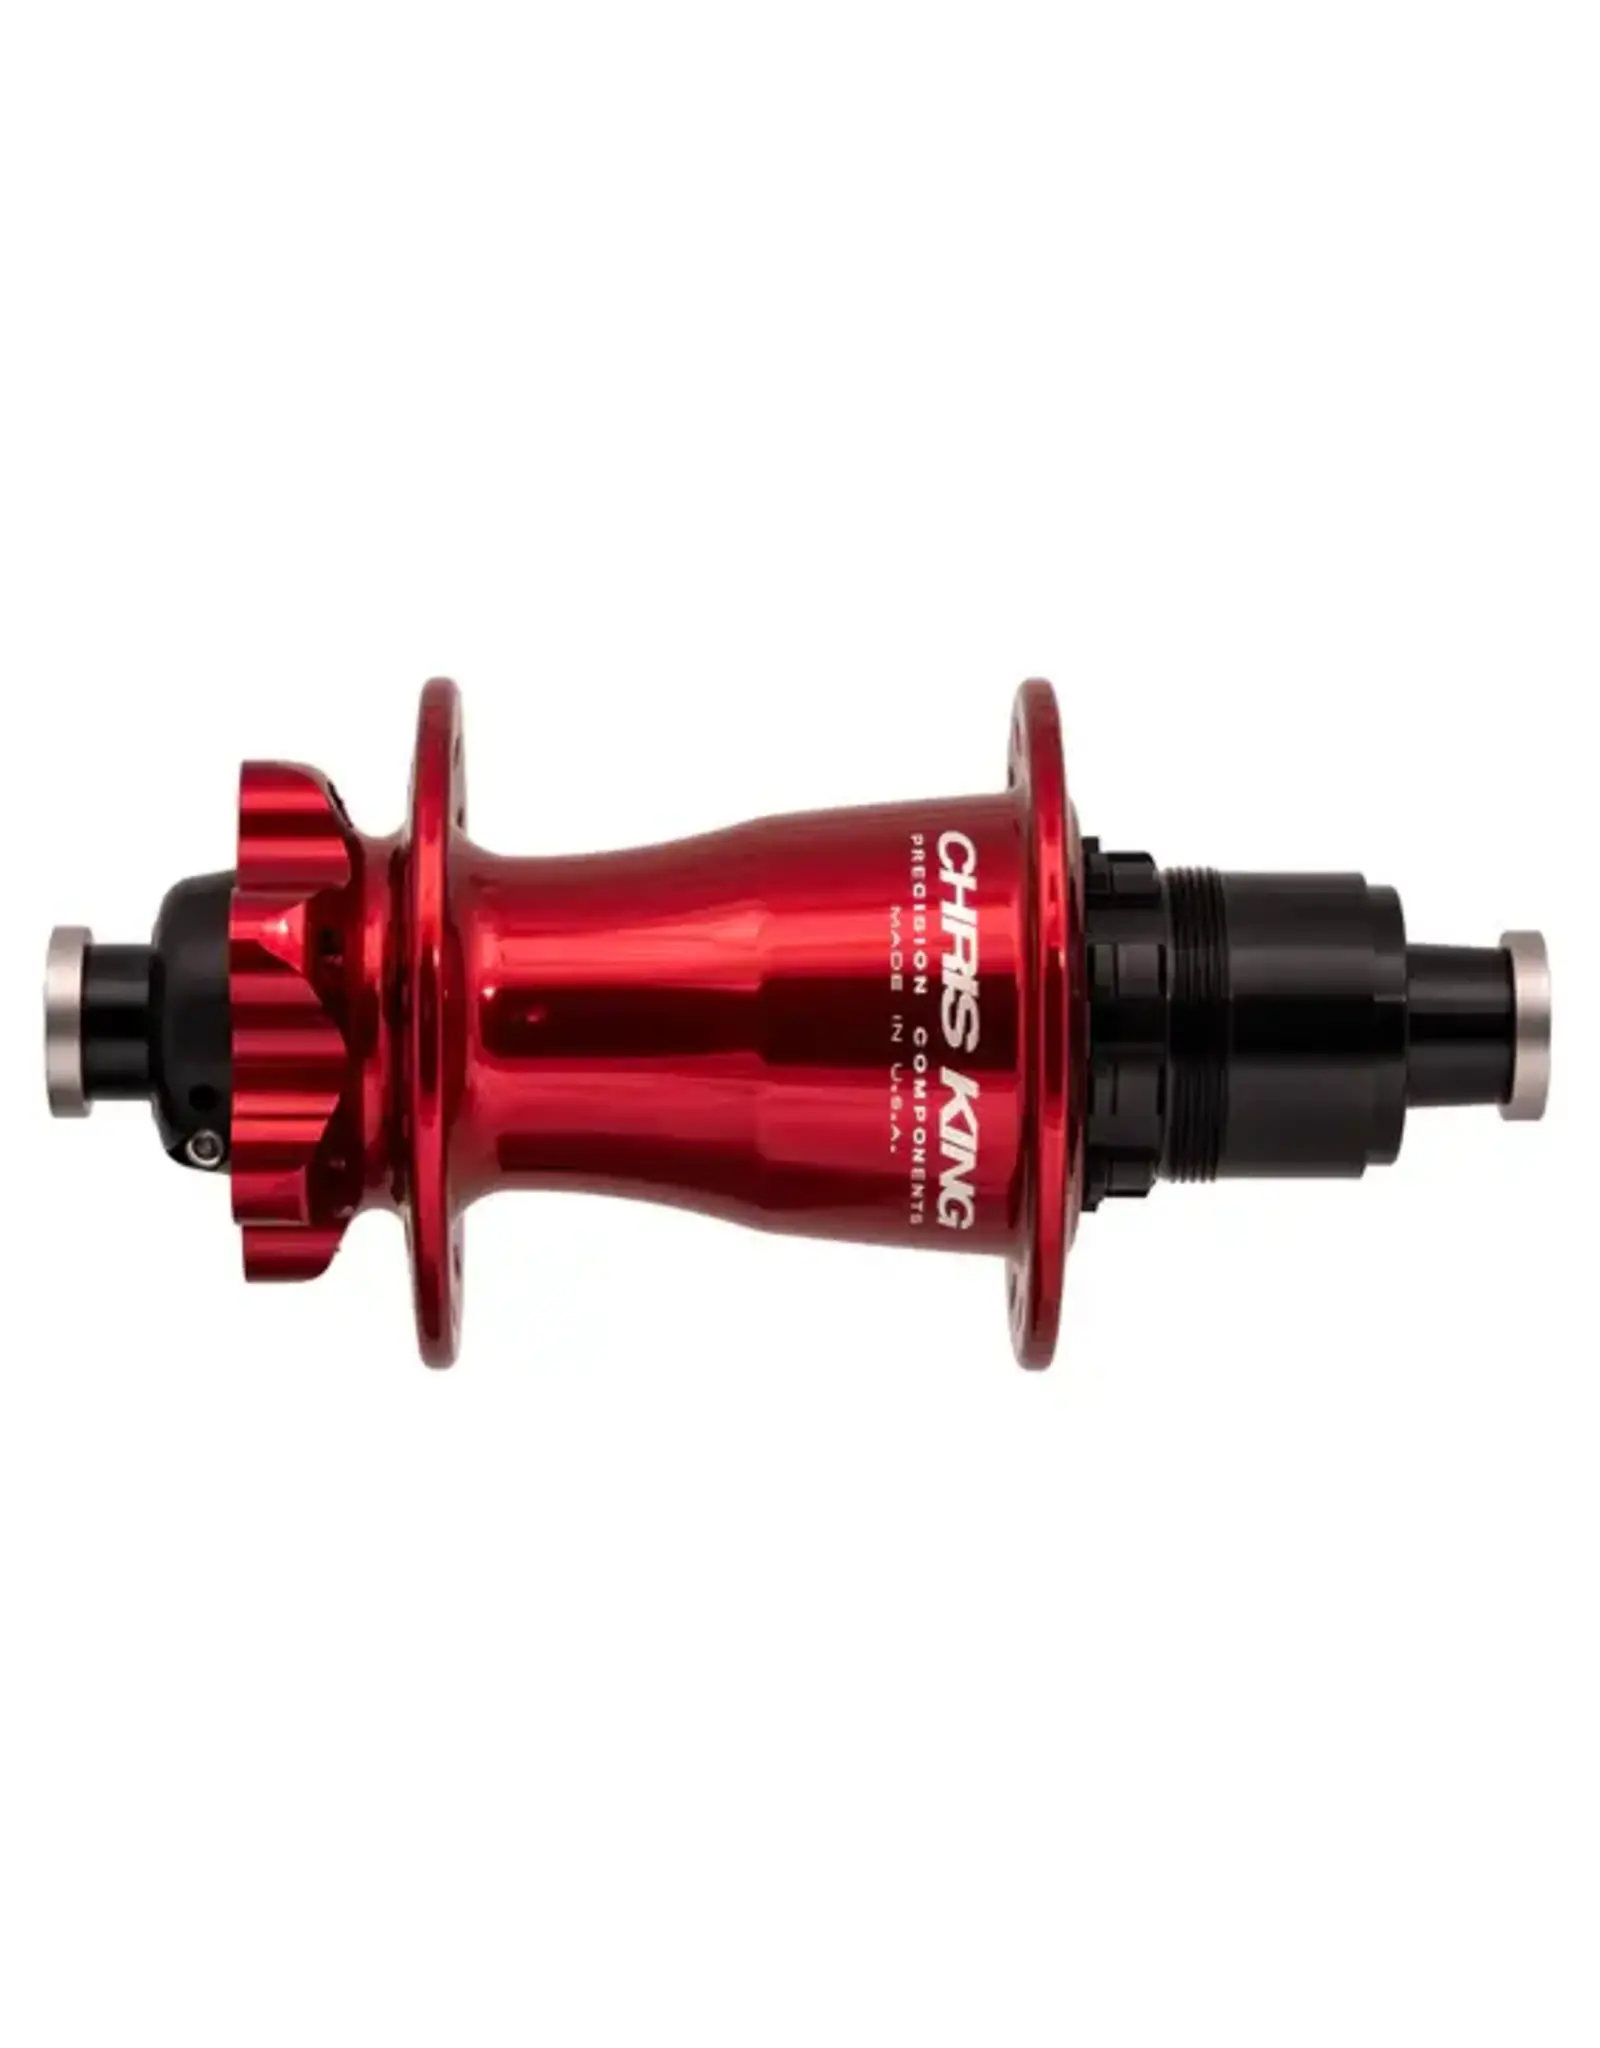 Chris King Components Hub, Rear, Boost, 6-bolt, 32h, 148x12, XD, Red